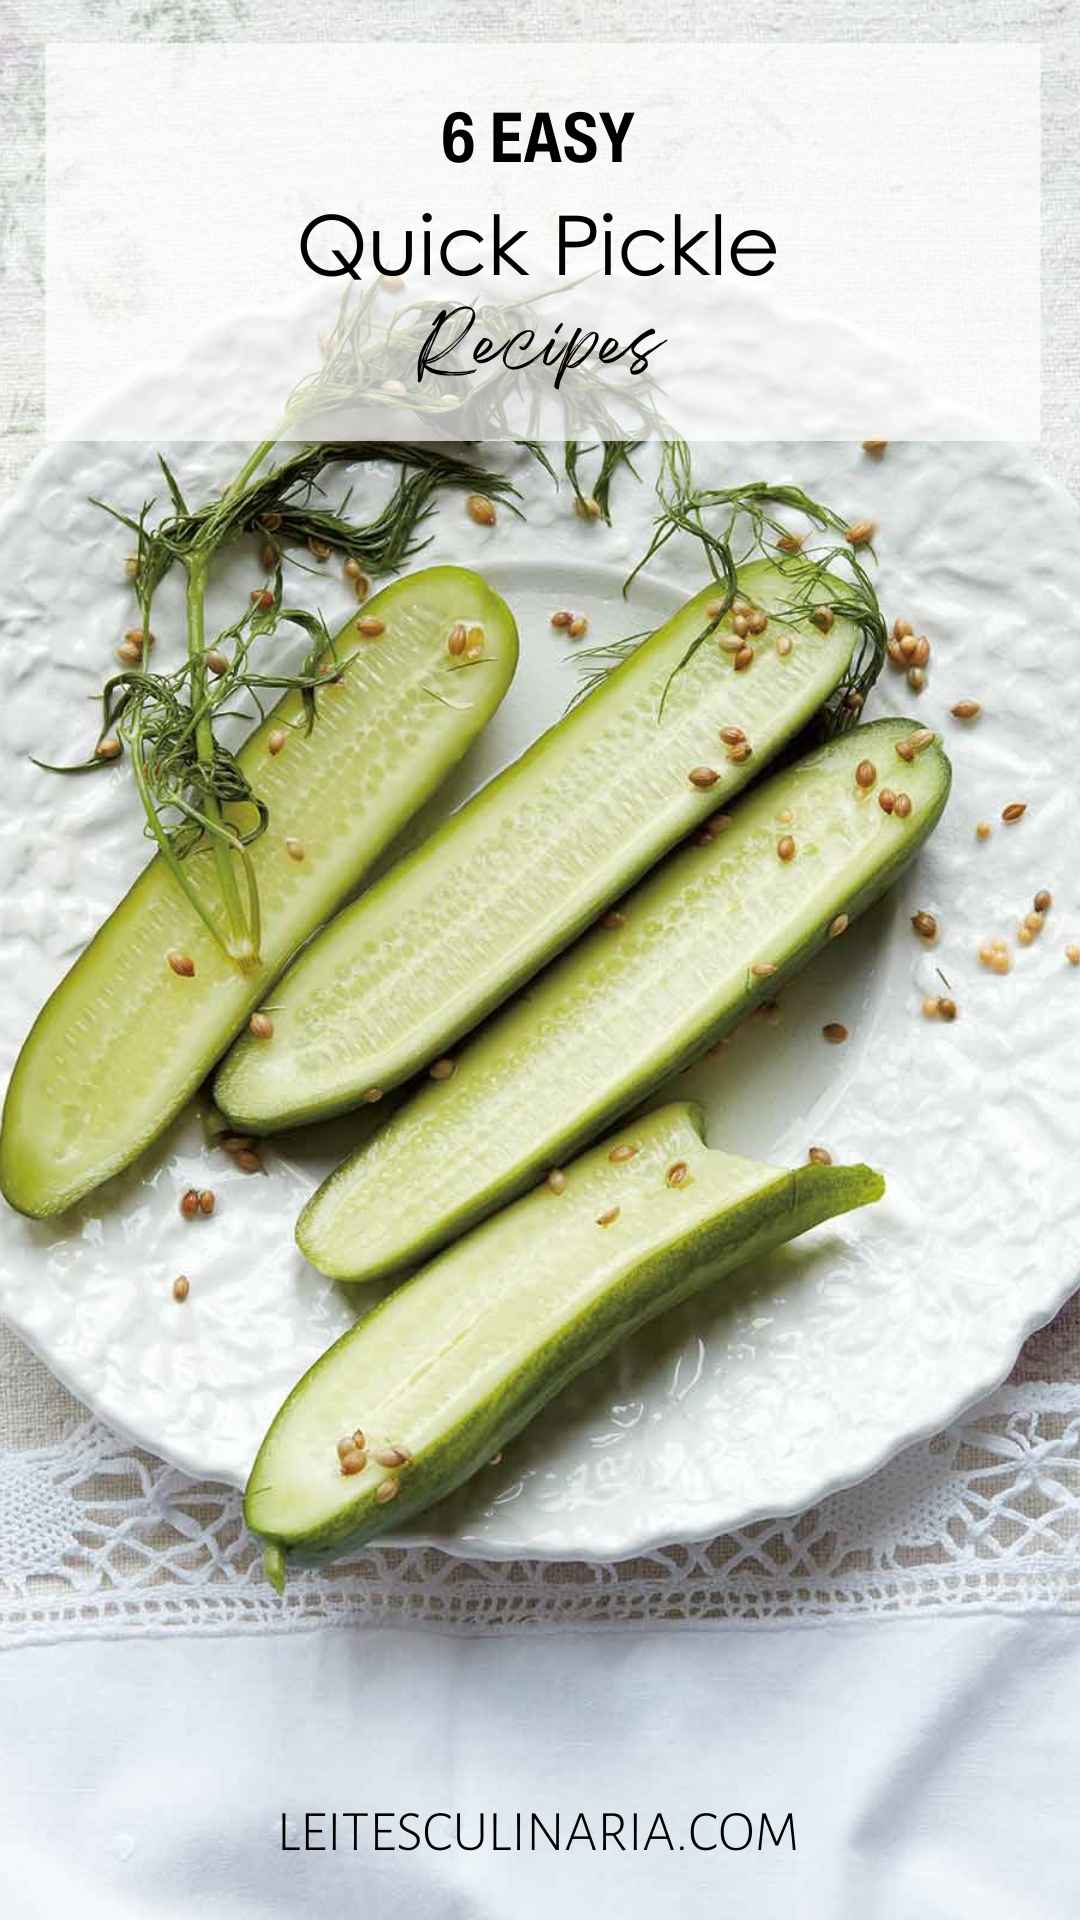 Four dill pickles on a plate.